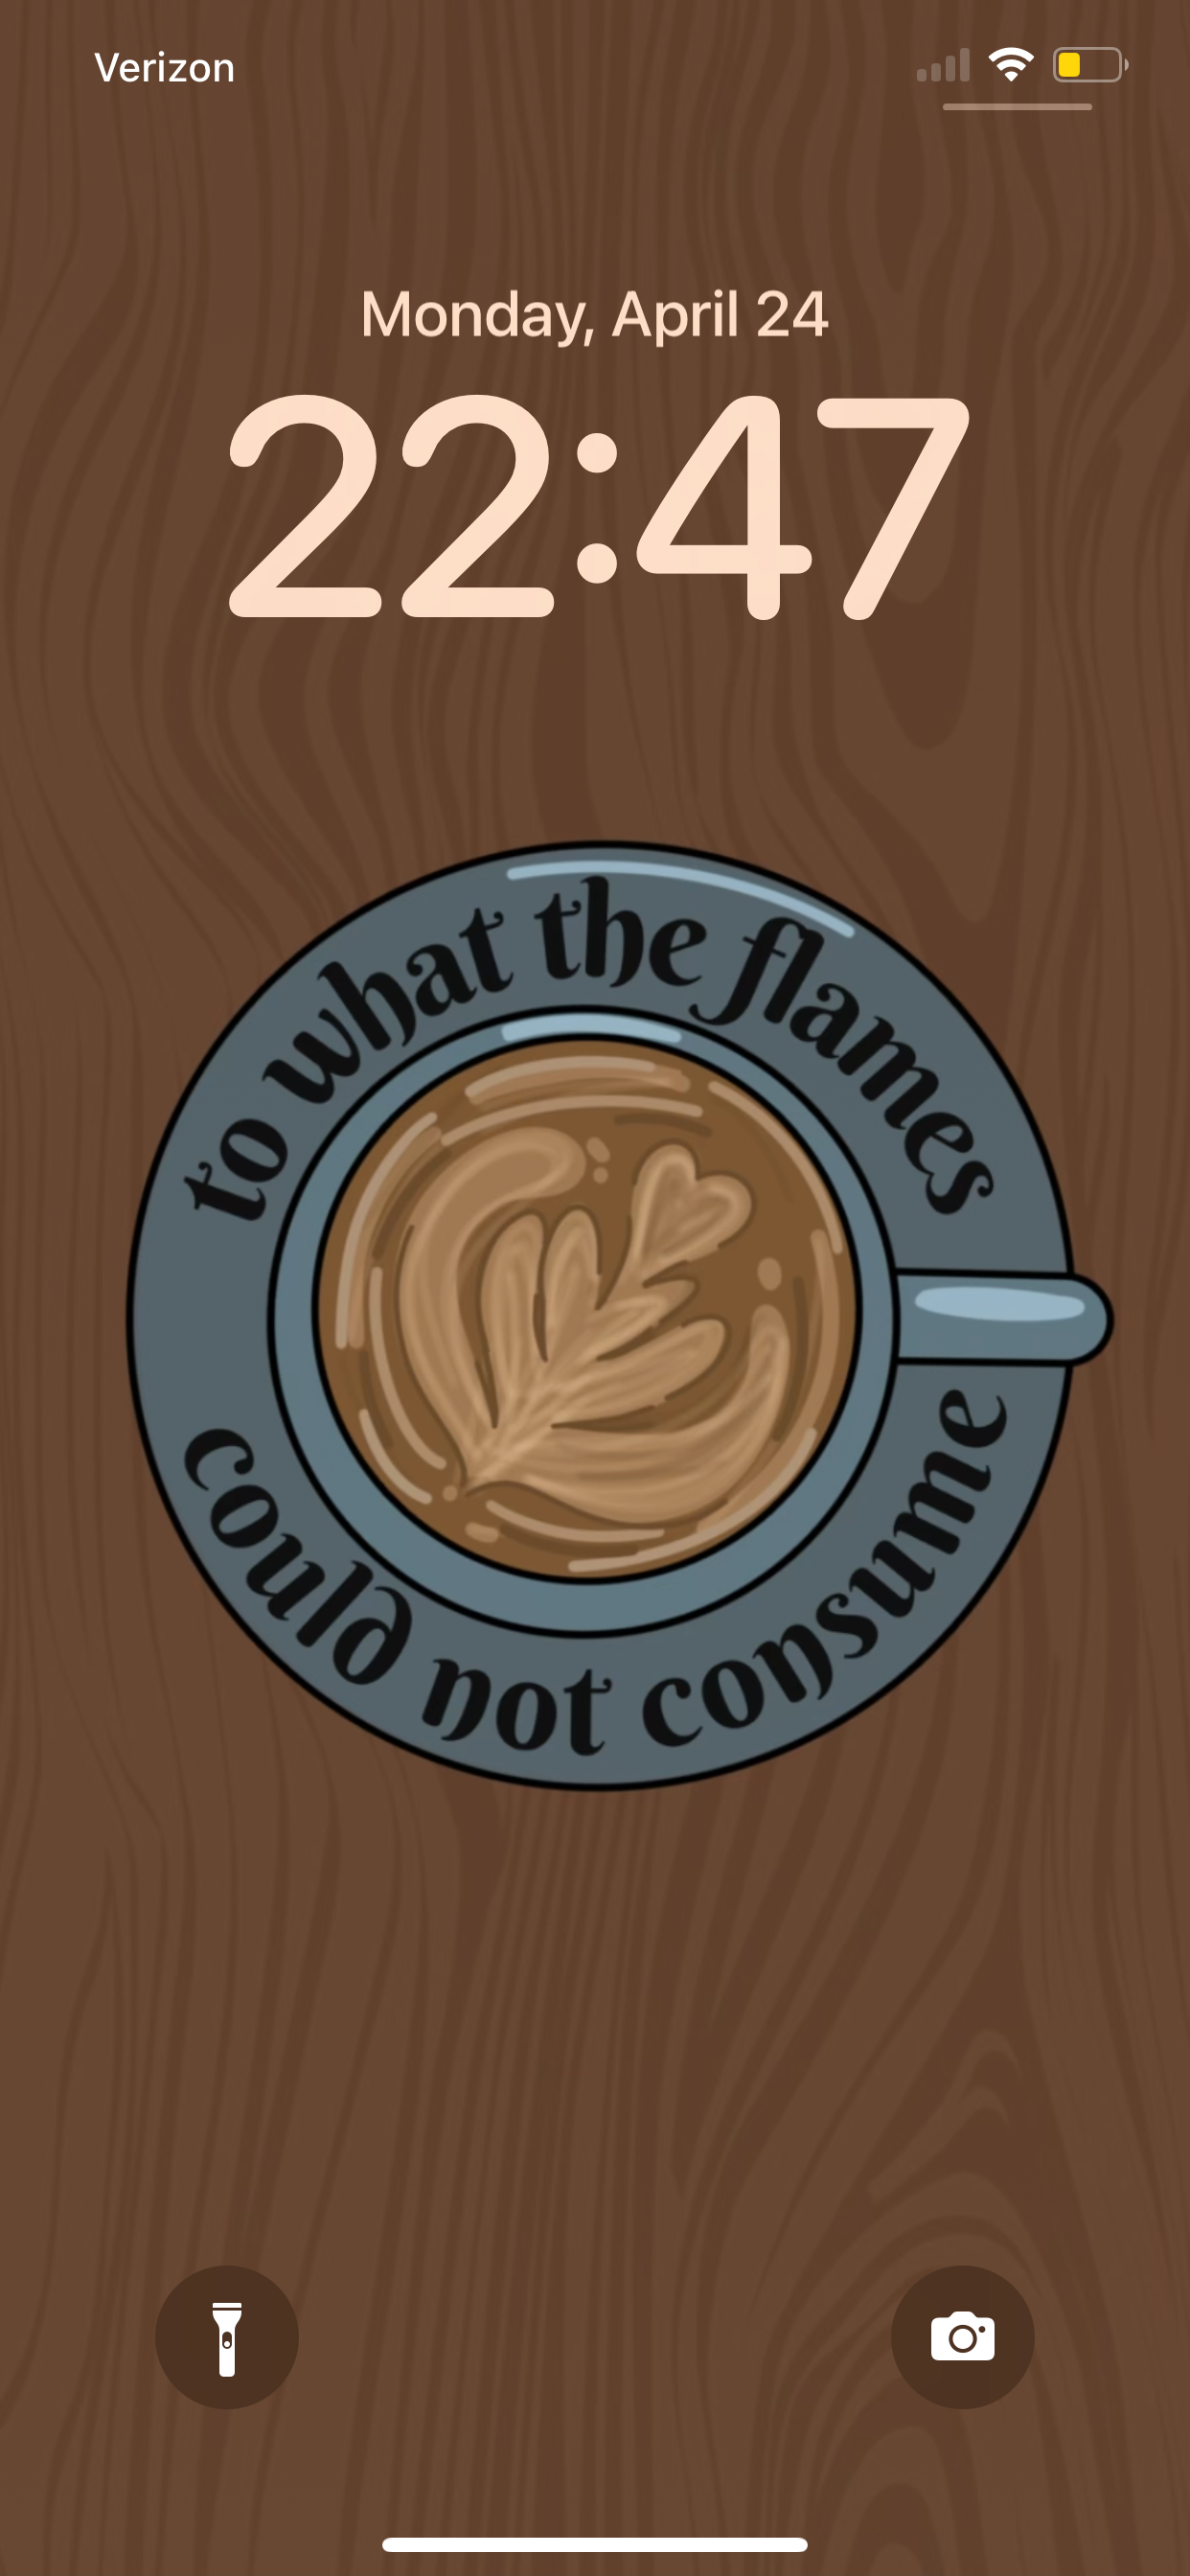 Image of phone lockscreen showing the "to what the flames could not consume" wallpaper. This design features an aerial view of a coffee mug with leafy latte art inside. On the mugs saucer is written the quote: "to what the flames could not consume".